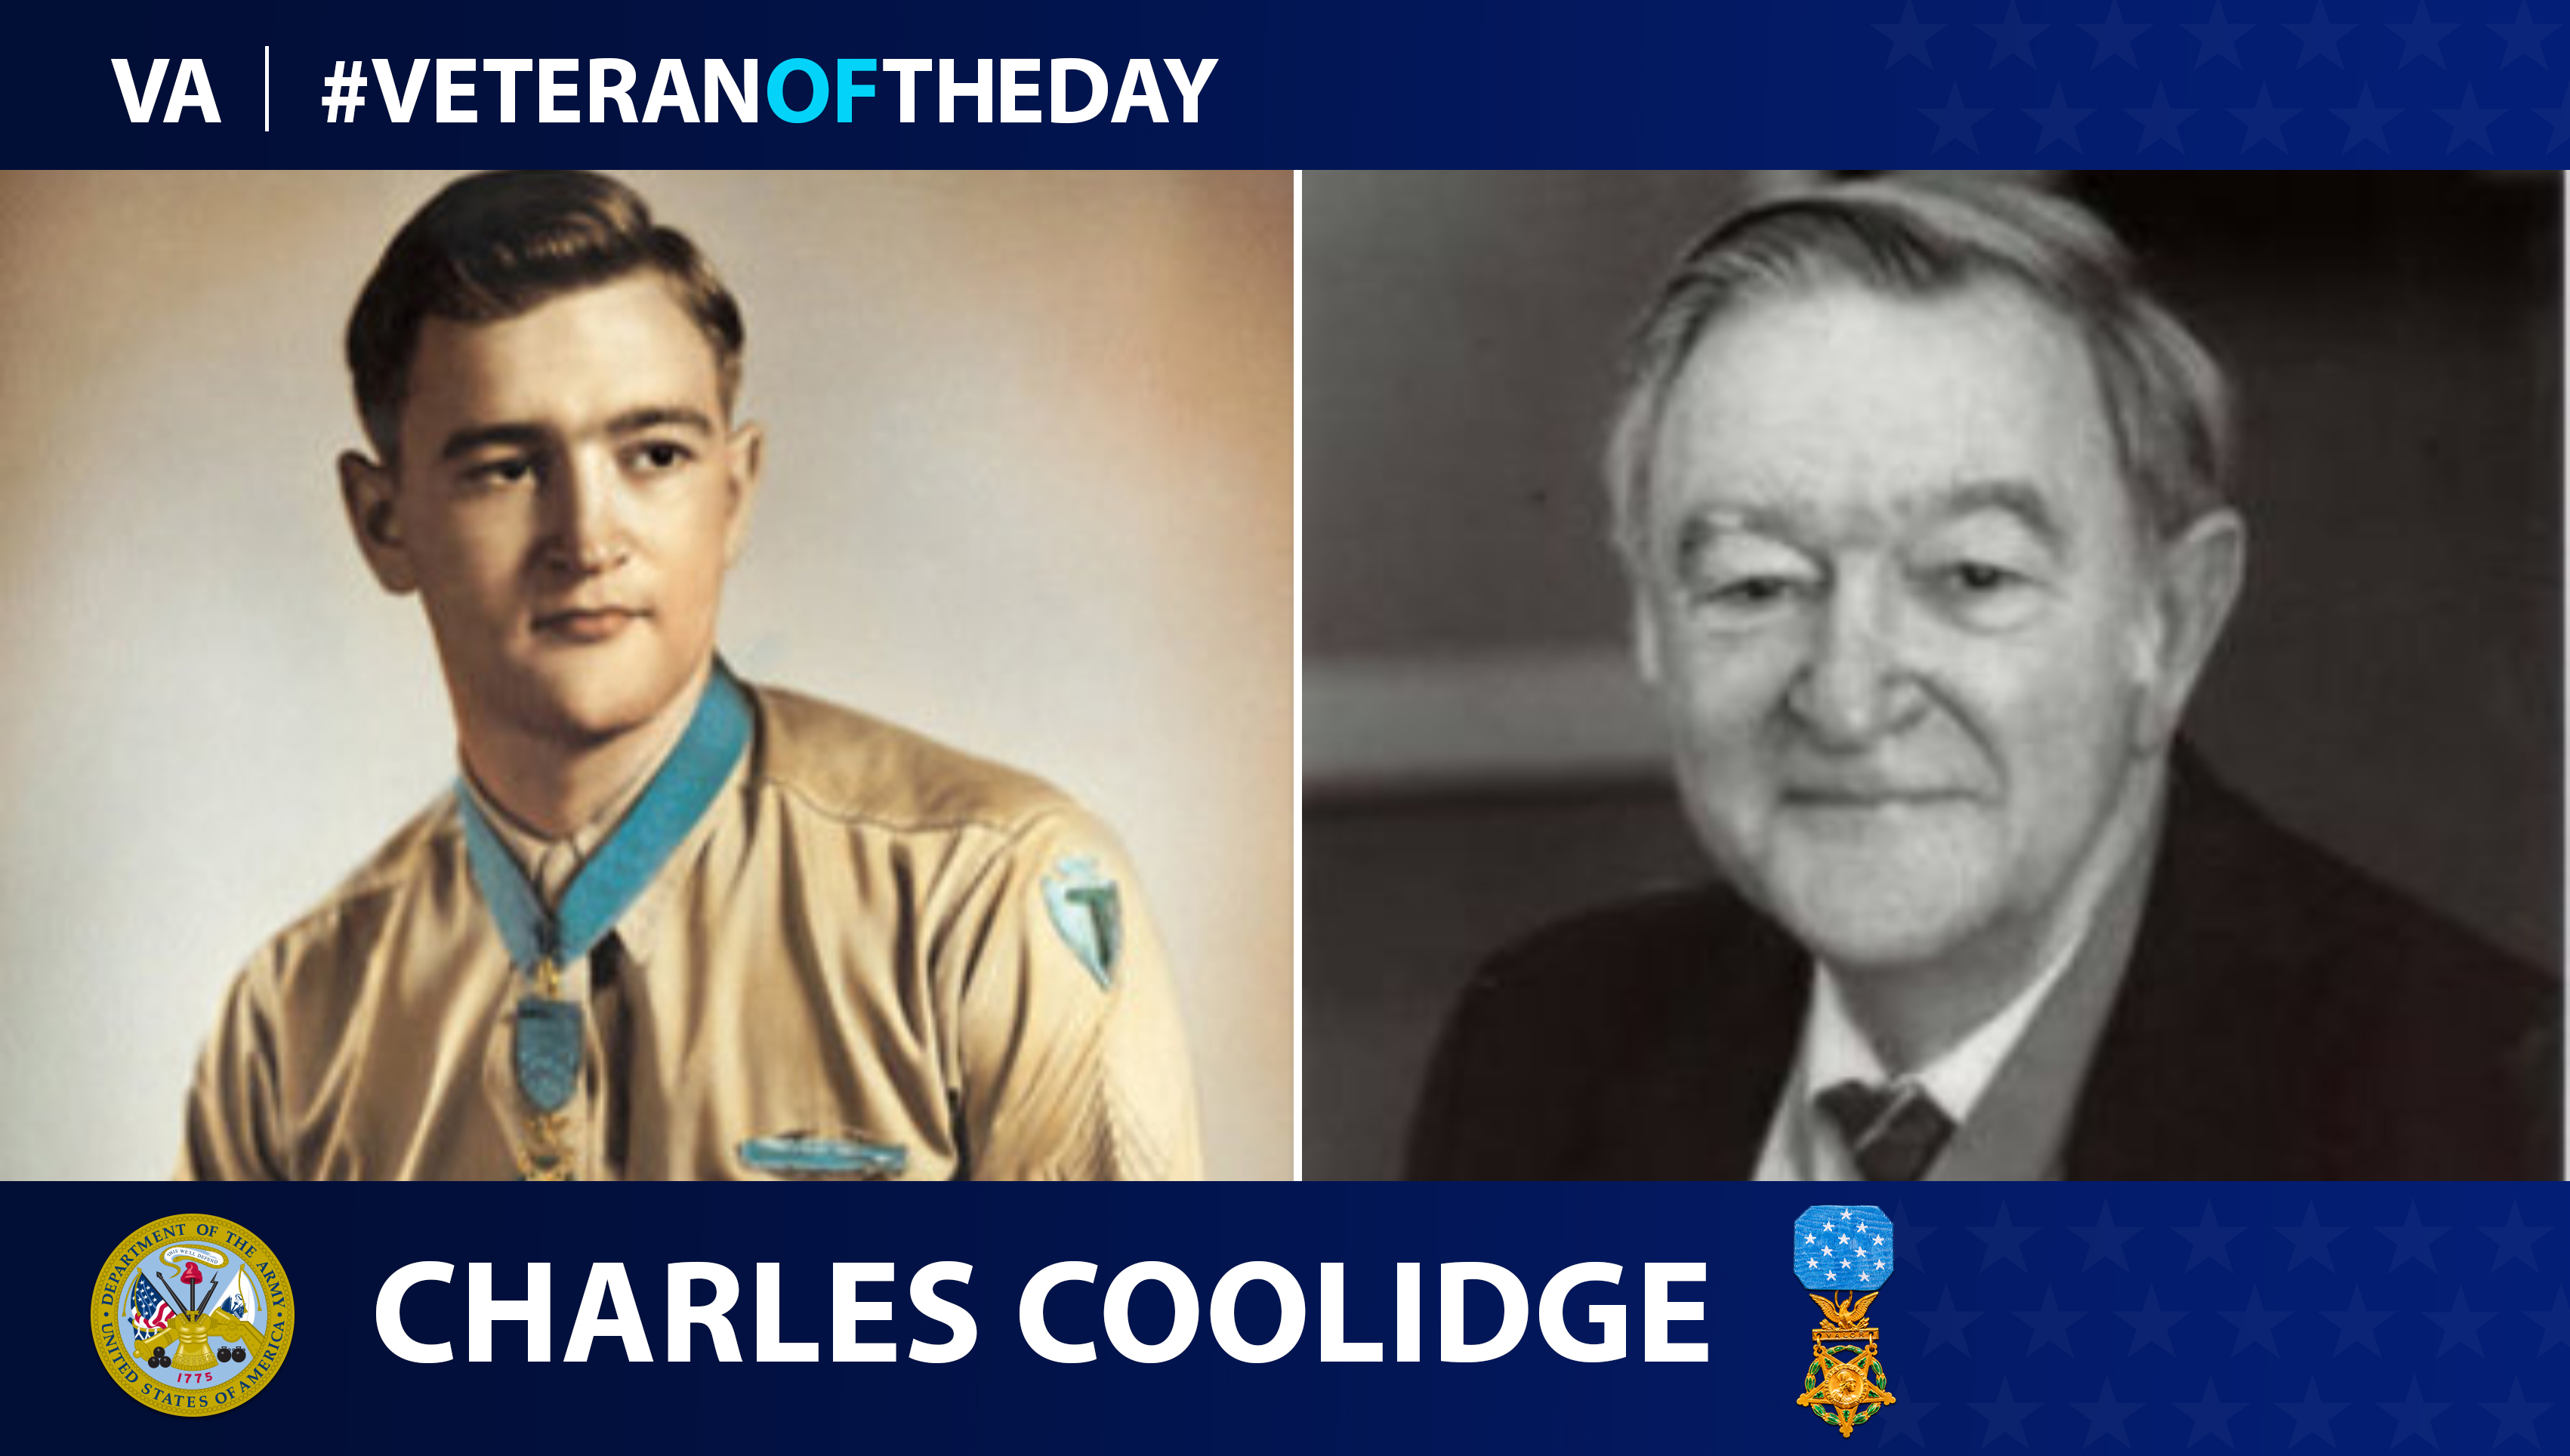 Army Veteran Charles Coolidge is today's Veteran of the Day.